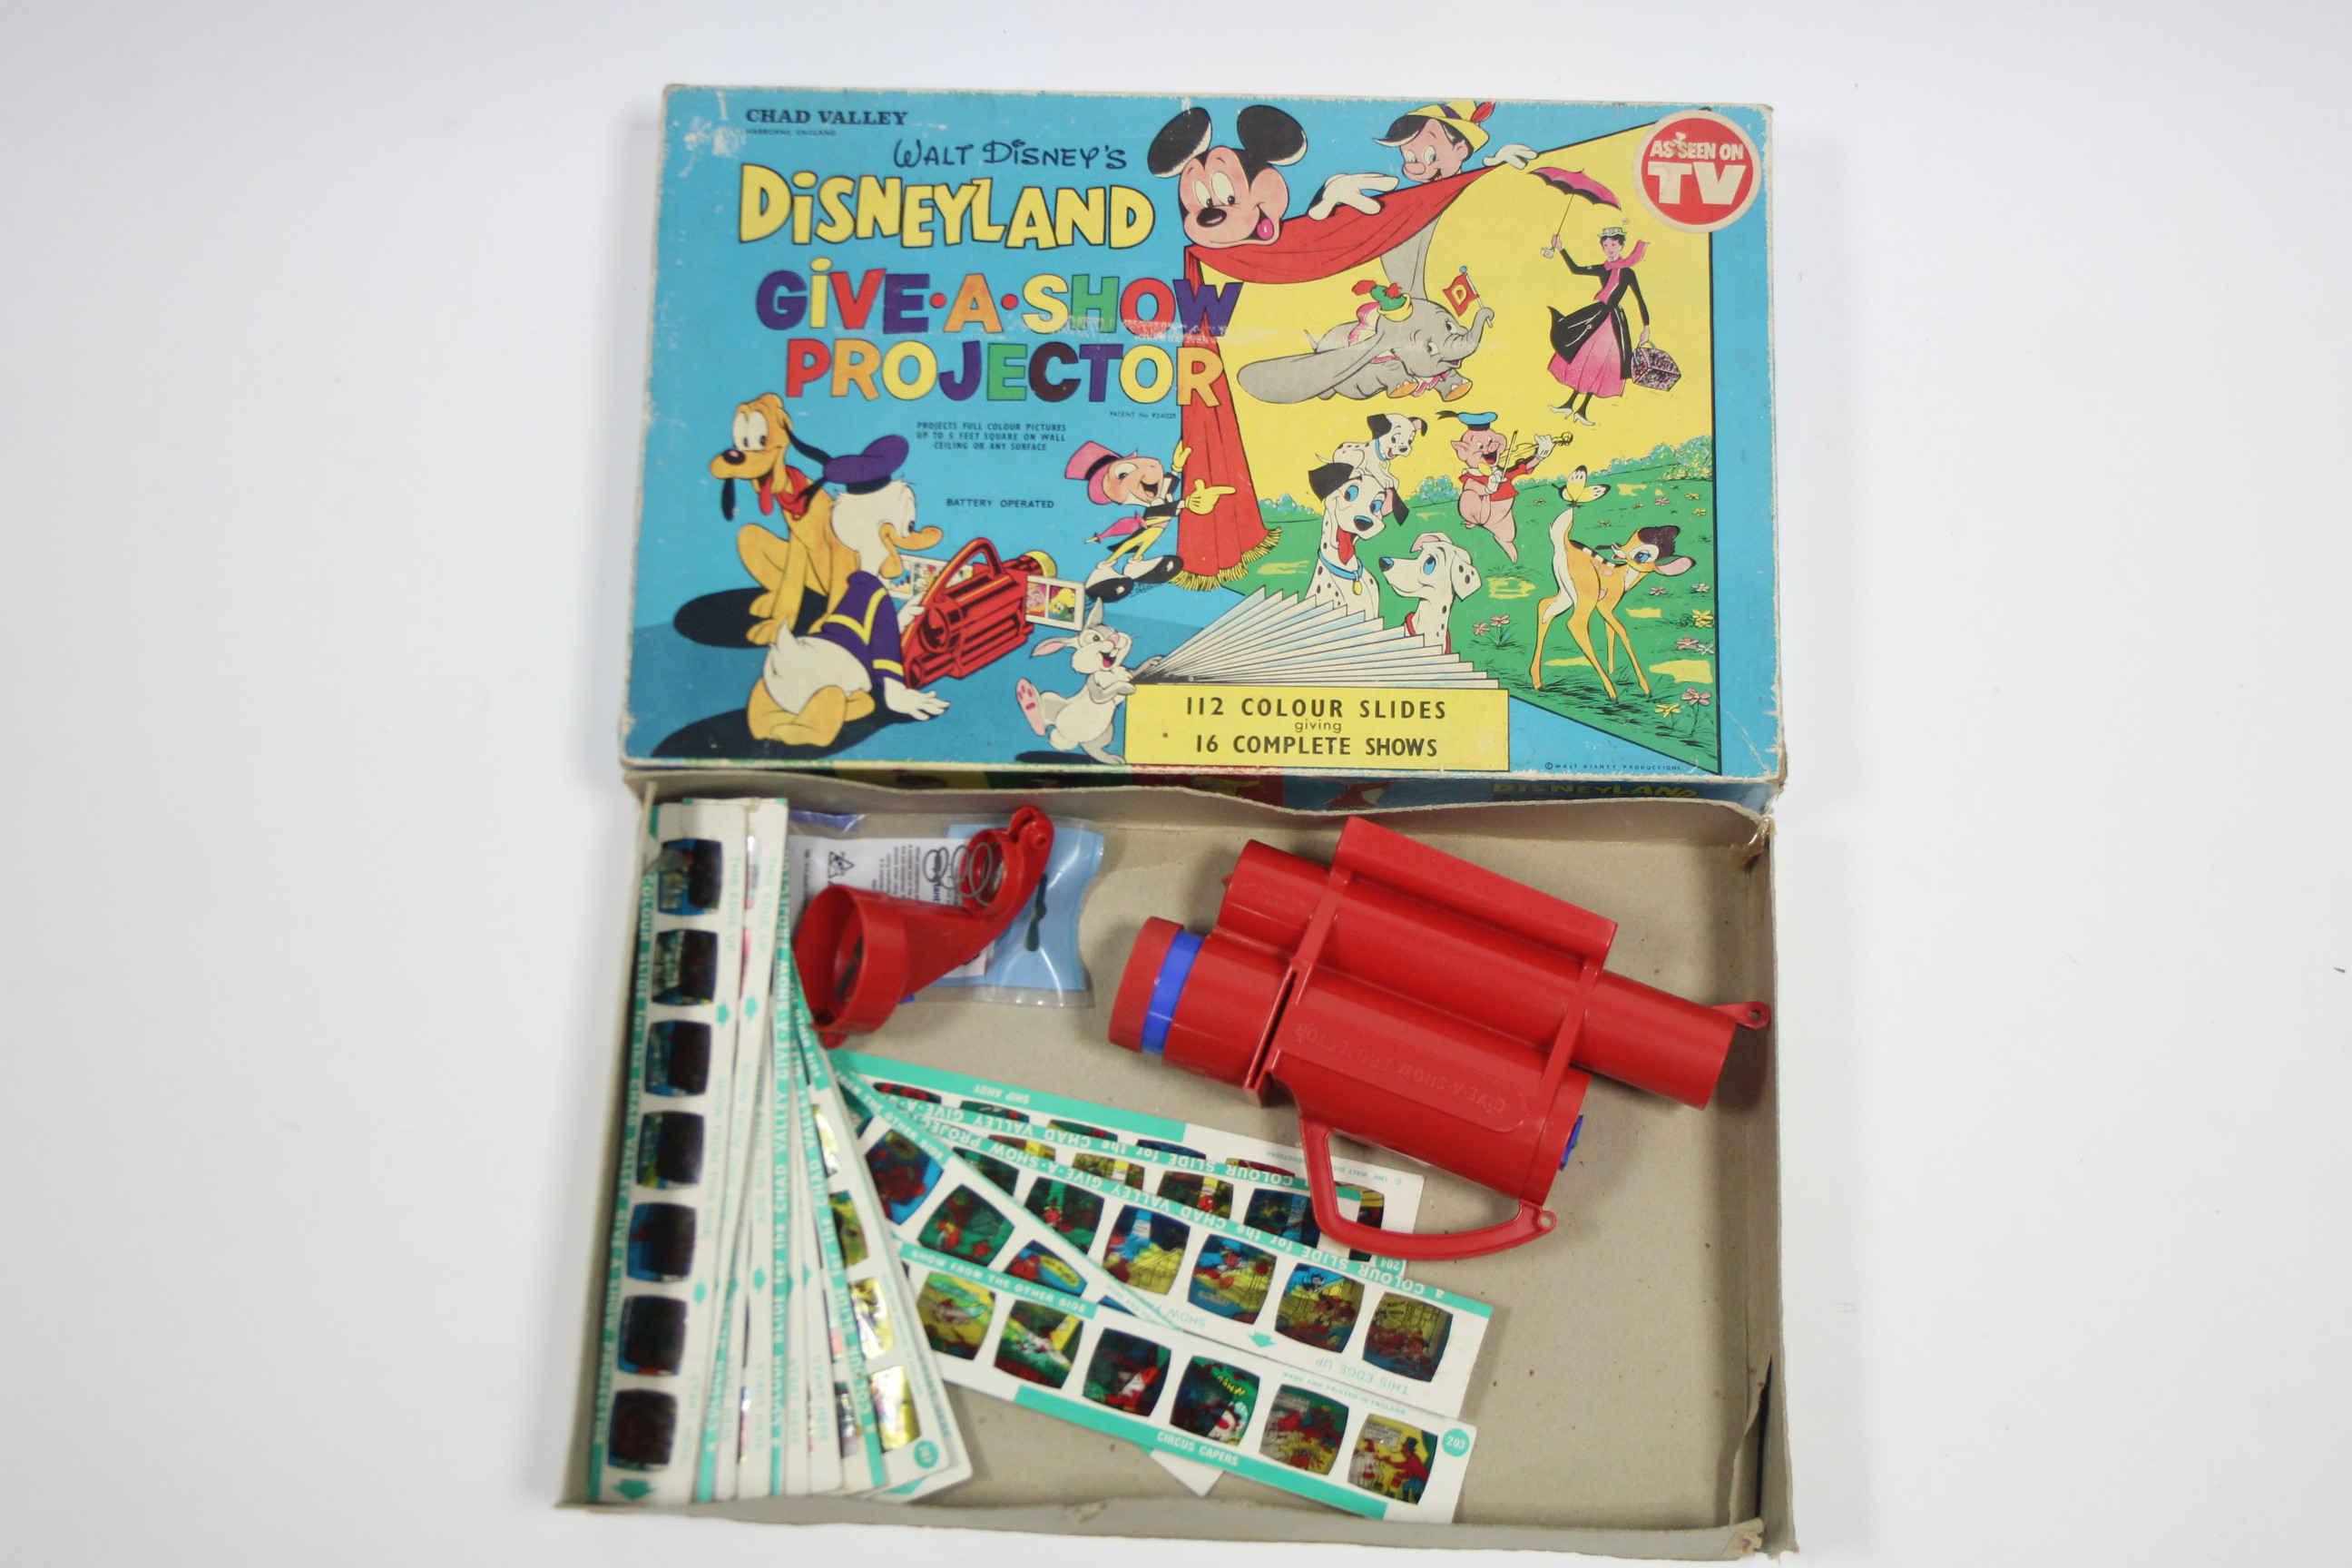 A Chad Valley Walt Disney “Disneyland” Give-A-Show projector, boxed - Image 2 of 2